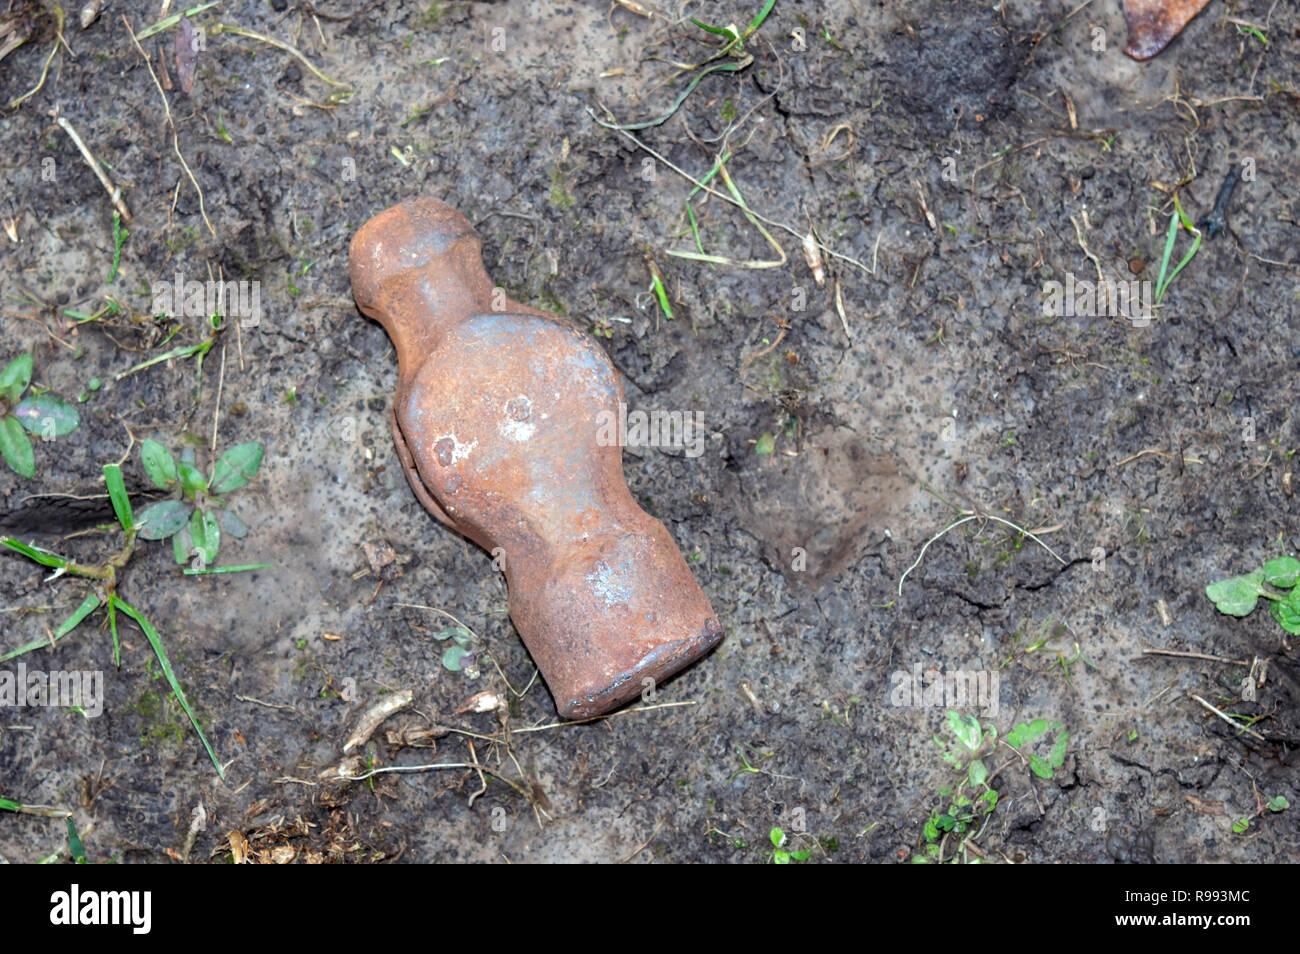 A close up look at a rusty ball peen hammer head that has been abandoned in the dirt. Bokeh background. Stock Photo